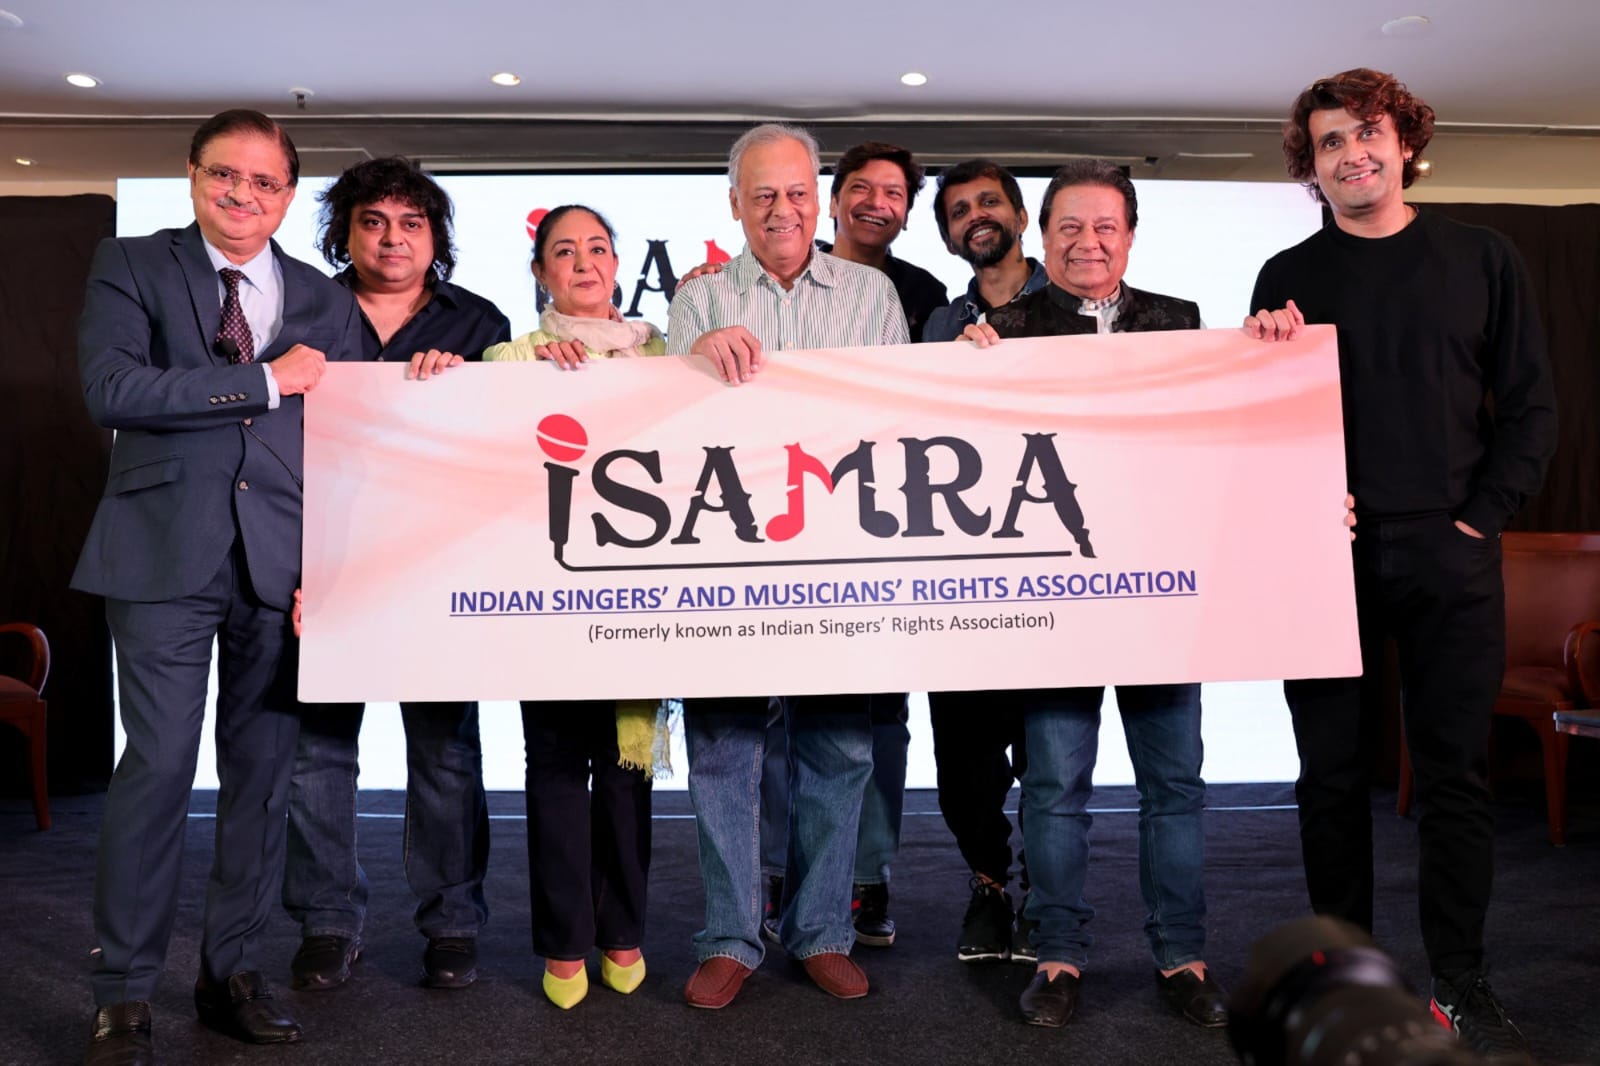 HISTORY IN THE MAKING lSRA turns 10, becomes ISAMRA, includes musicians under its wings